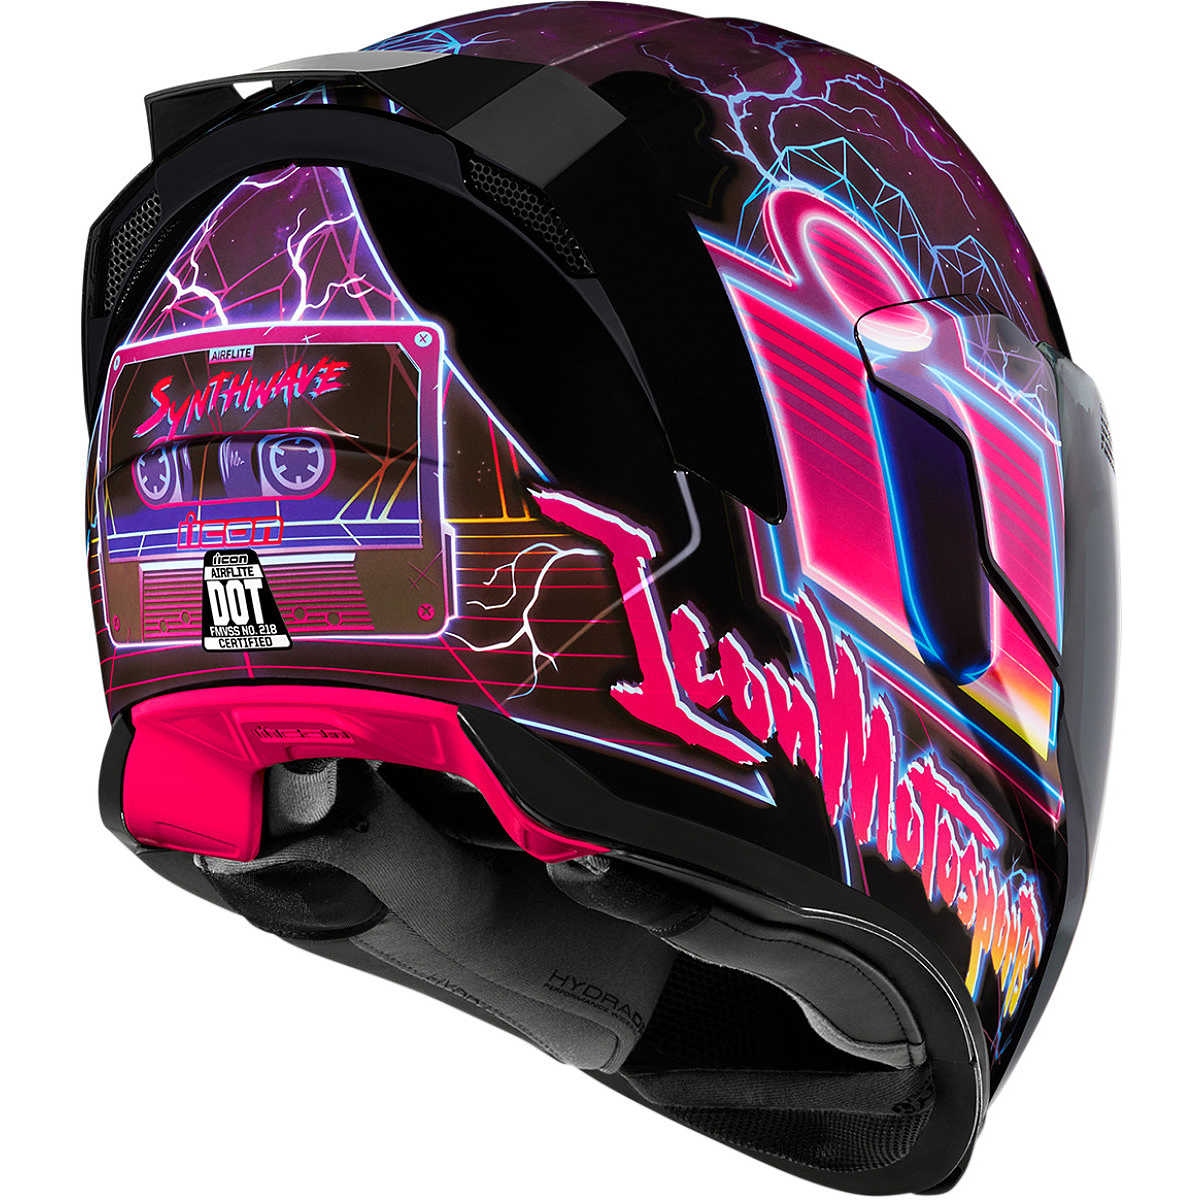 Casque intégral route Icon Airflite Synthwave - Violet